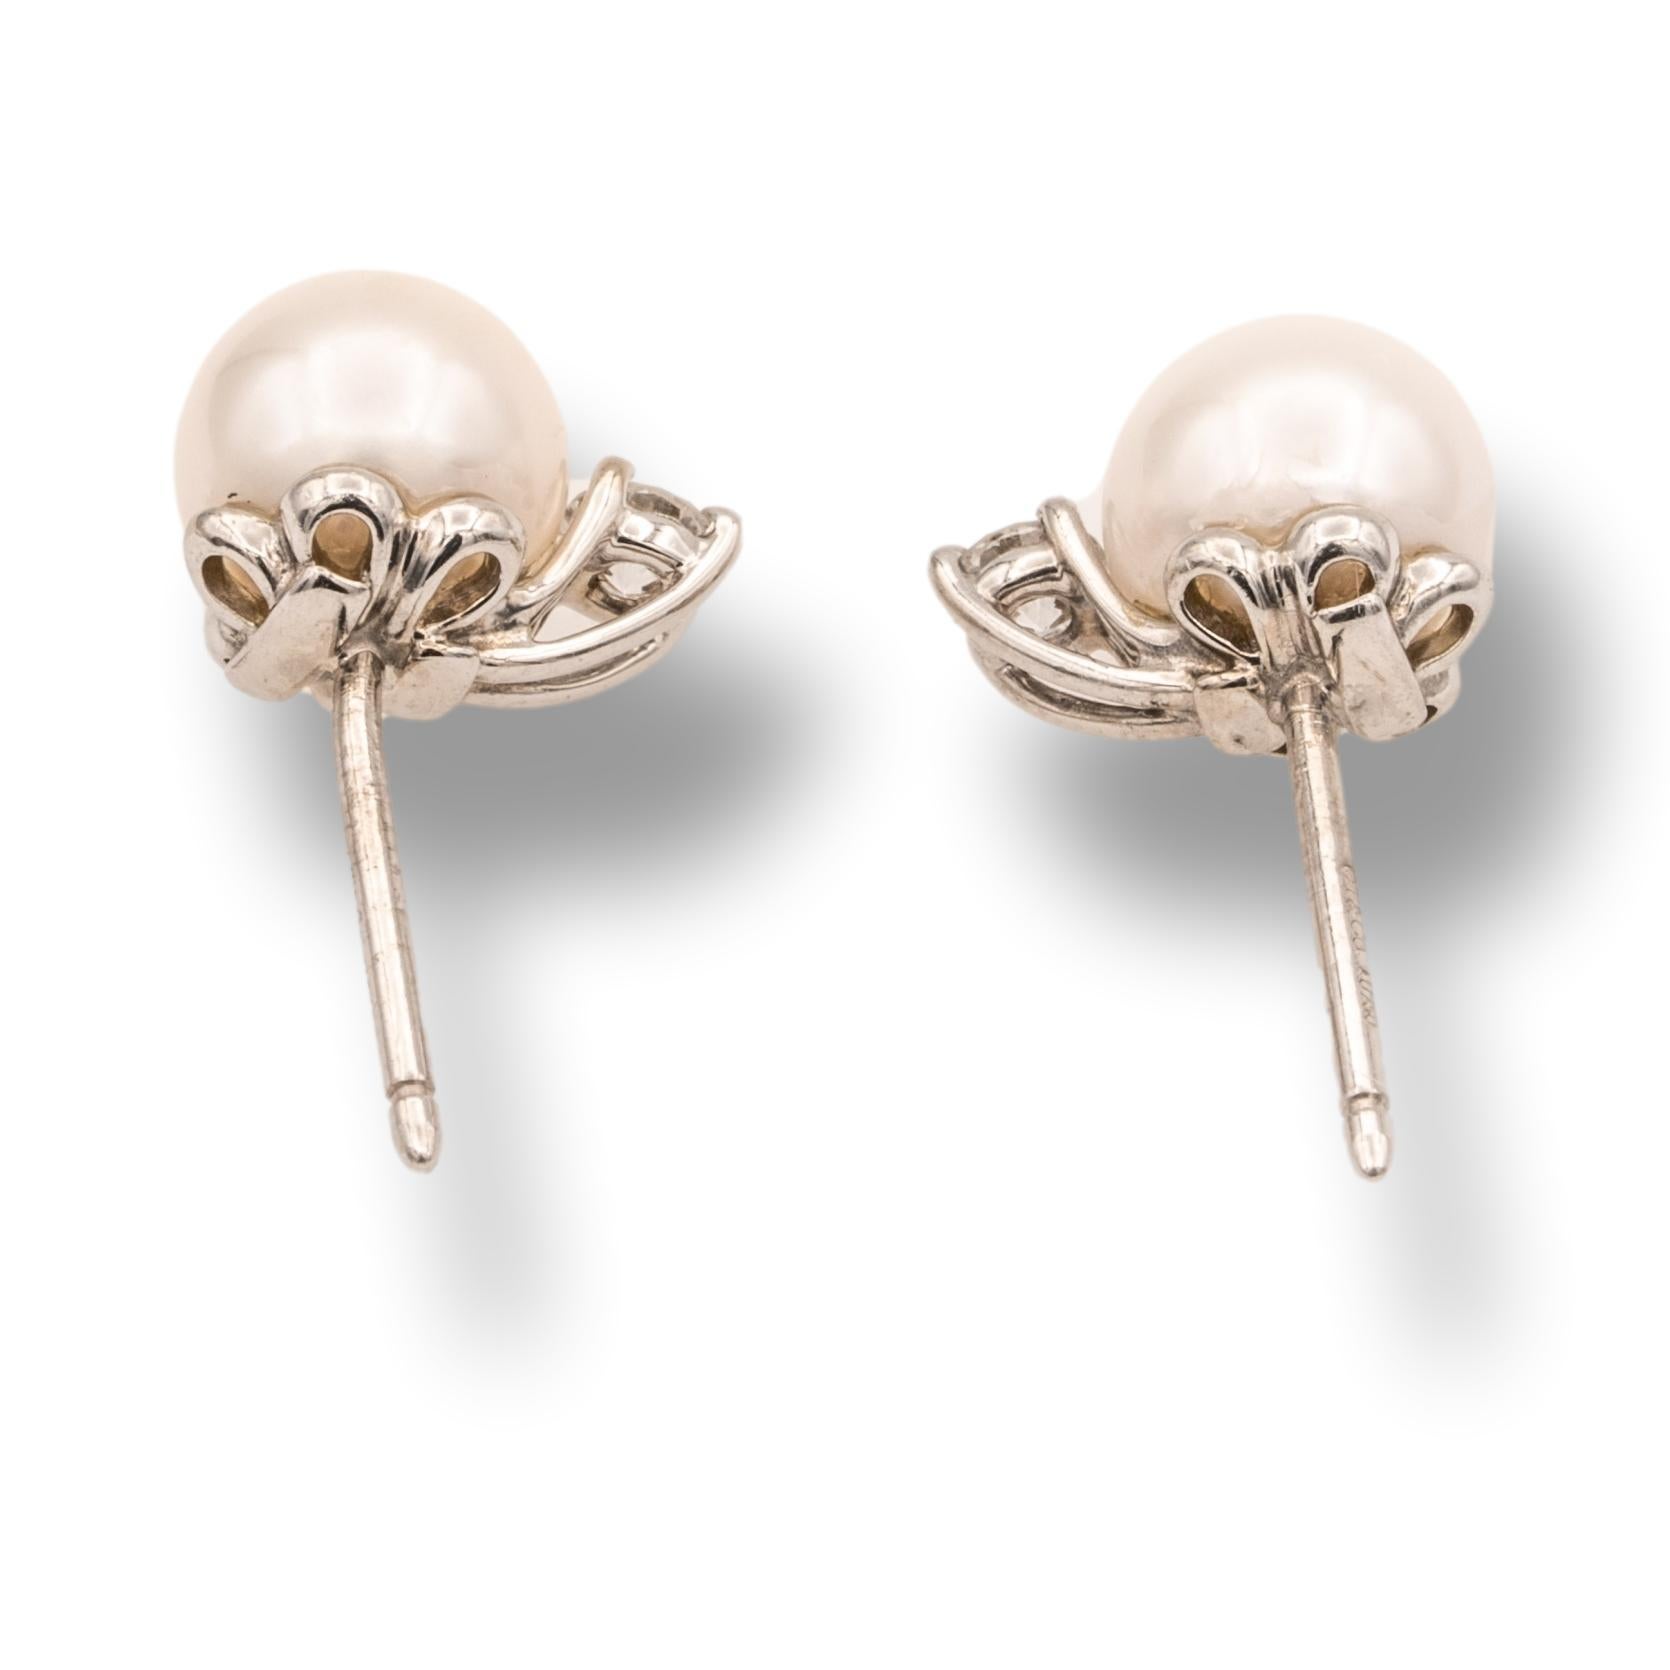 Tiffany & Co. Signature Pearl Stud Earrings finally crafted in 18 karat white gold with with 2 diamonds set in prongs weighing 0.16 carats total. The pearls have a pinkish luster and measure 7-7.5 mm with friction back posts and butterfly backs.